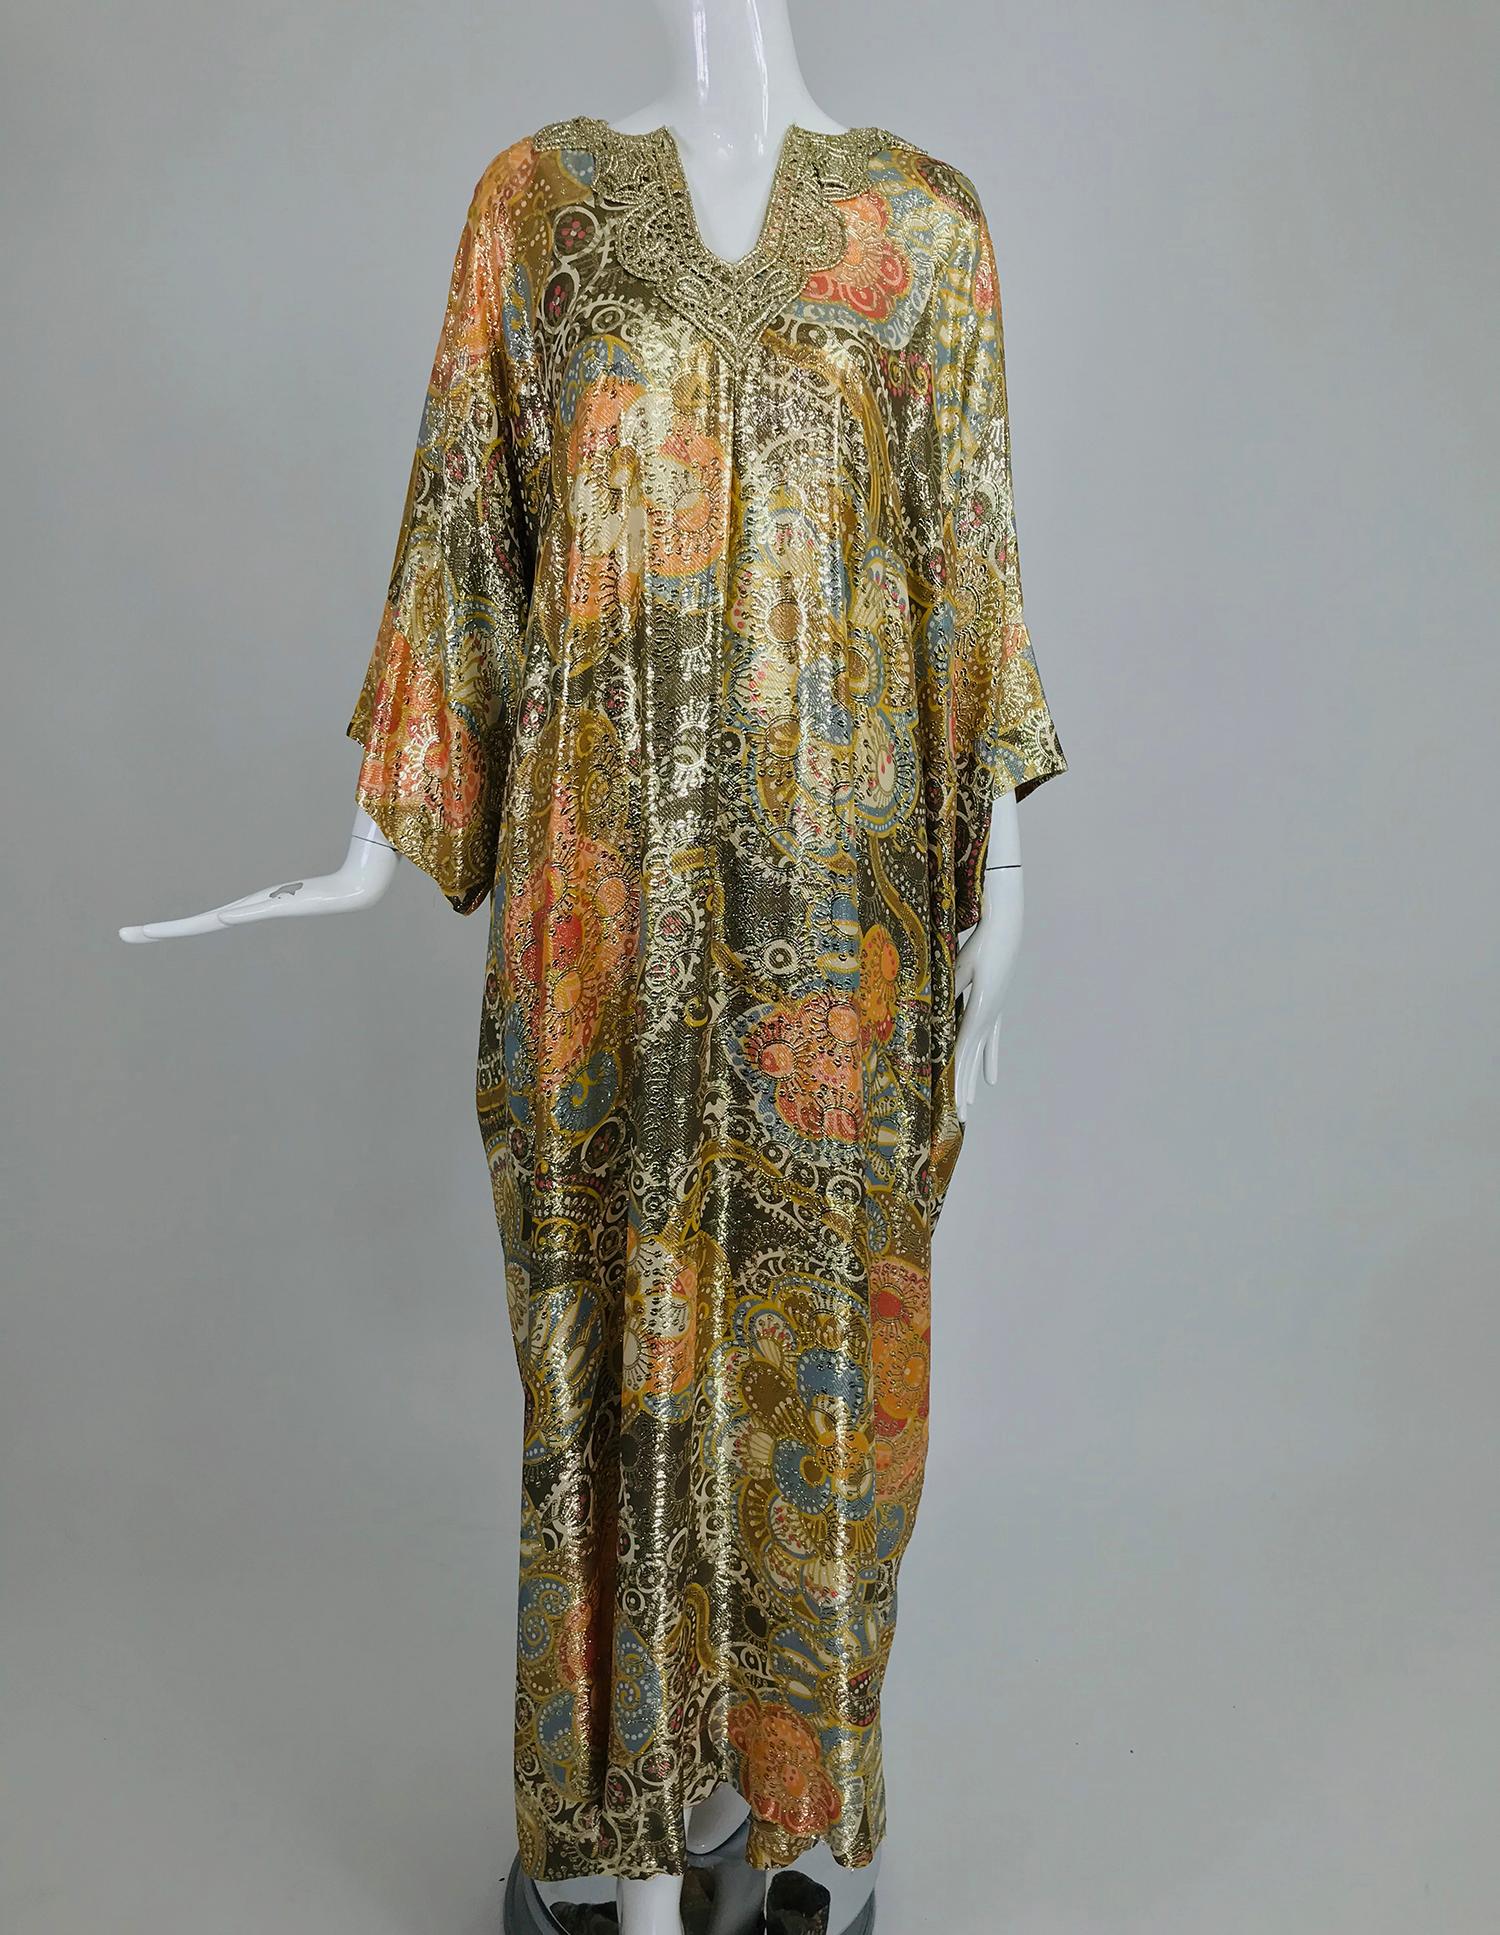 Lucie Ann metallic gold brocade full length caftan from the 1970s. This gorgeous caftan in made from a gold metallic brocade that is woven through a silky floral pattern that has the colours of autumn, large floral motifs are shot through with gold,